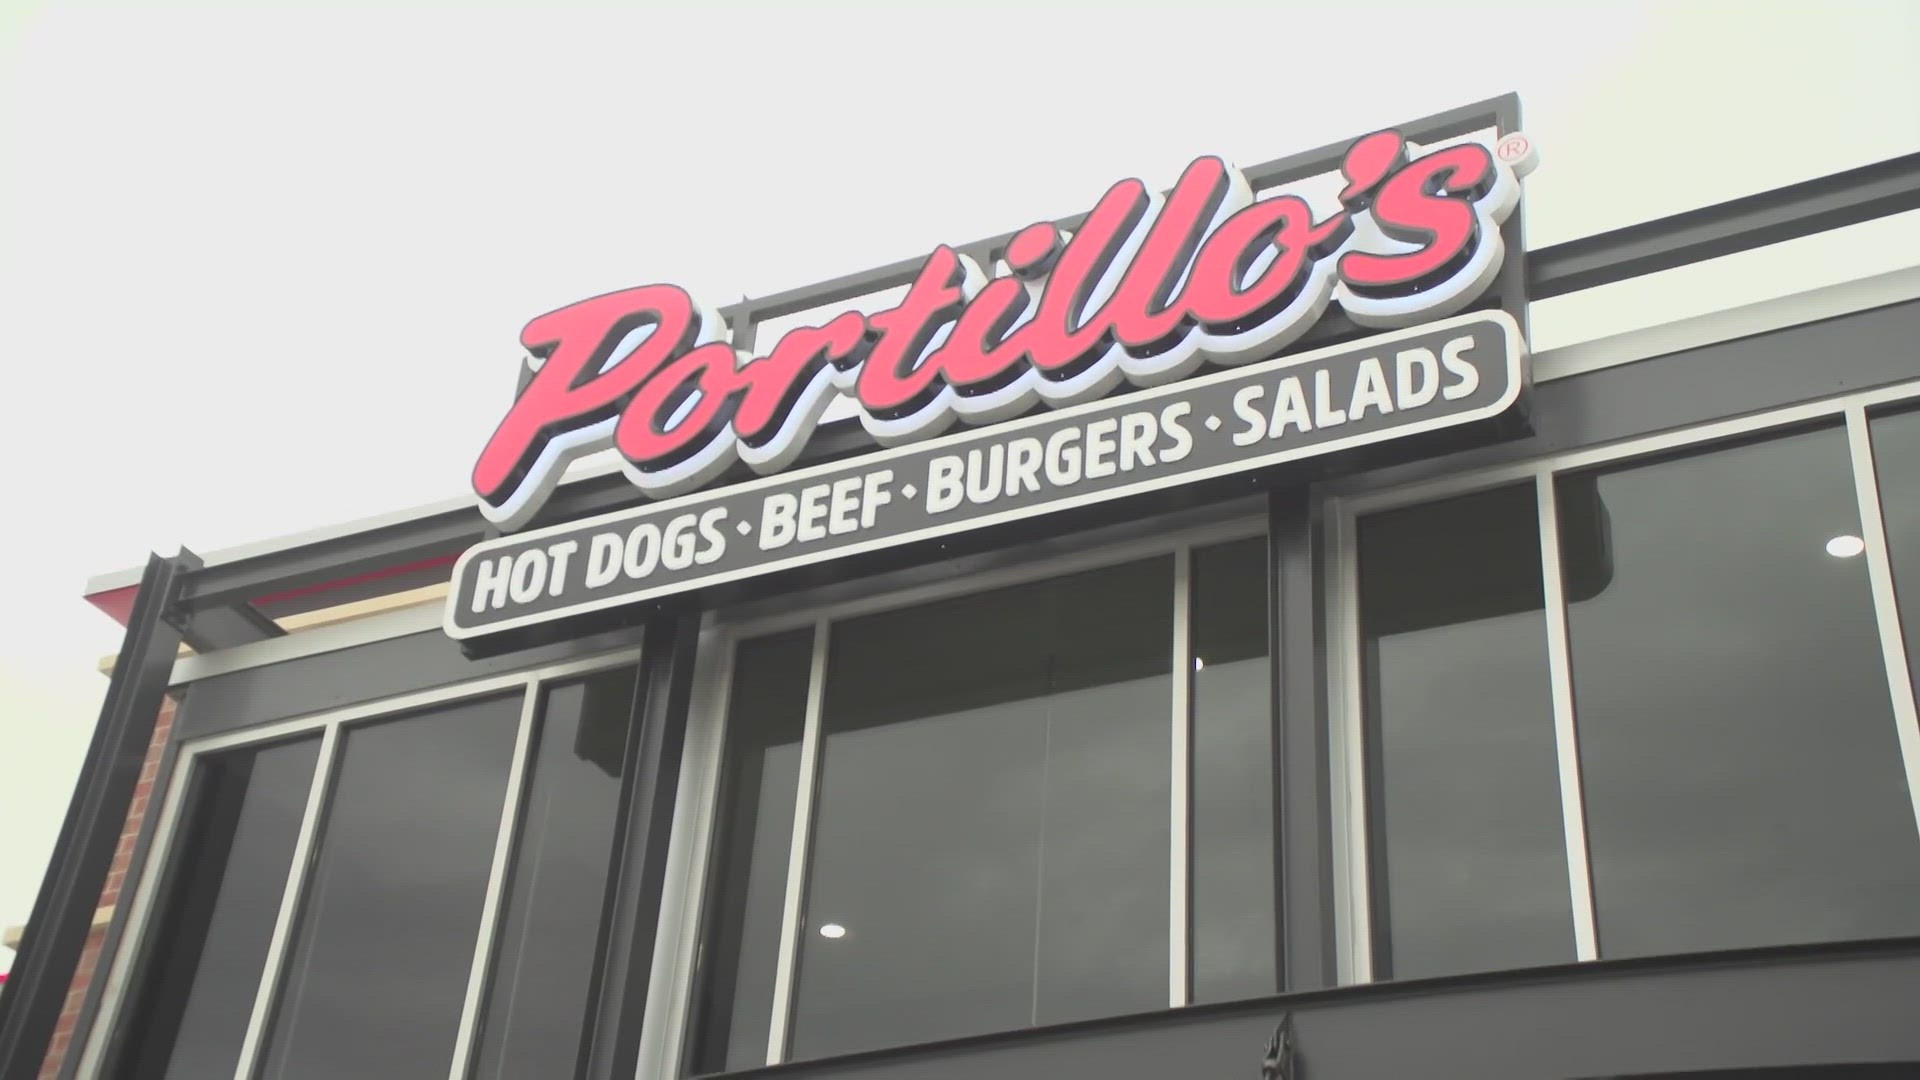 Portillo's is working on new locations in north Fort Worth and Arlington, as well as in Allen, according to online records and the company.